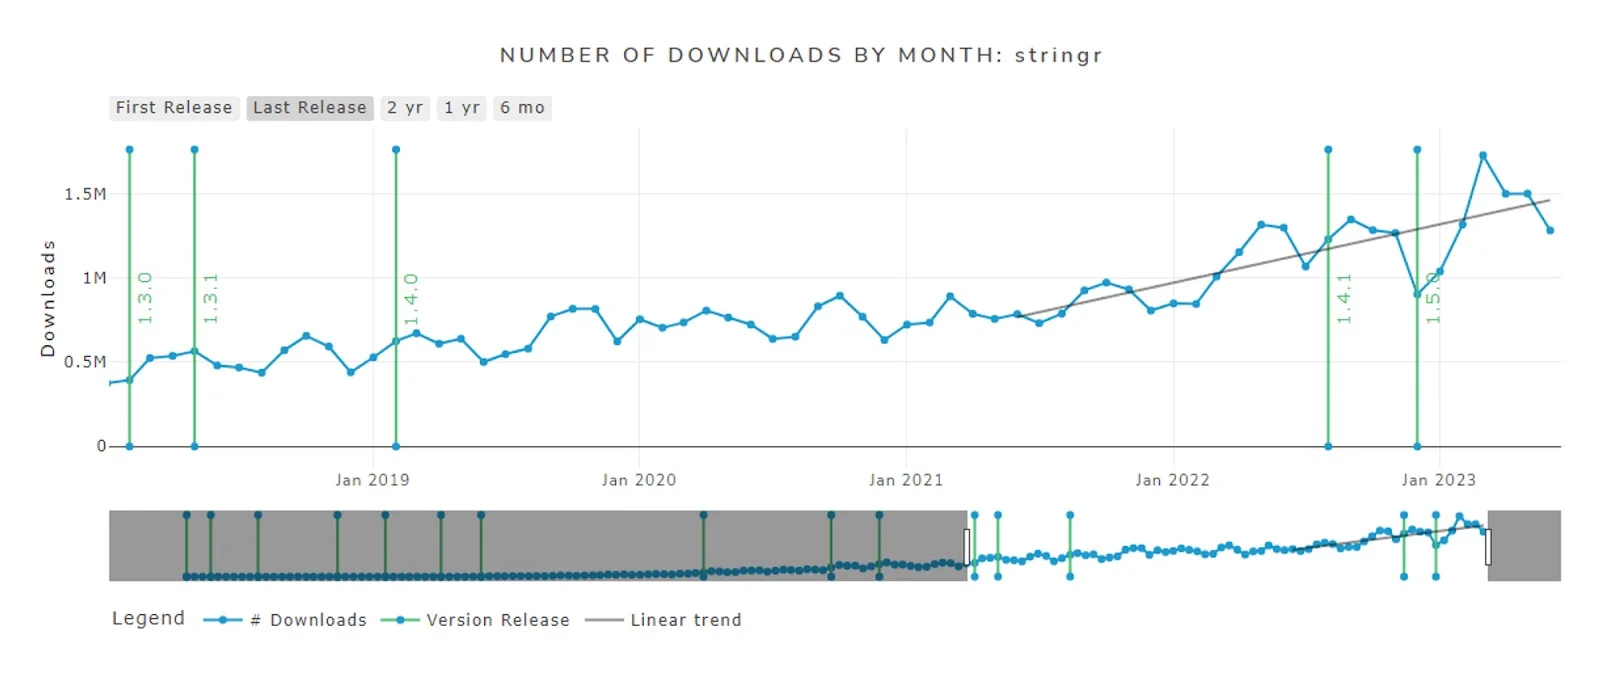 ine graph depicting the number of monthly downloads for the 'stringr' R package, including version release markers and a linear trend line.